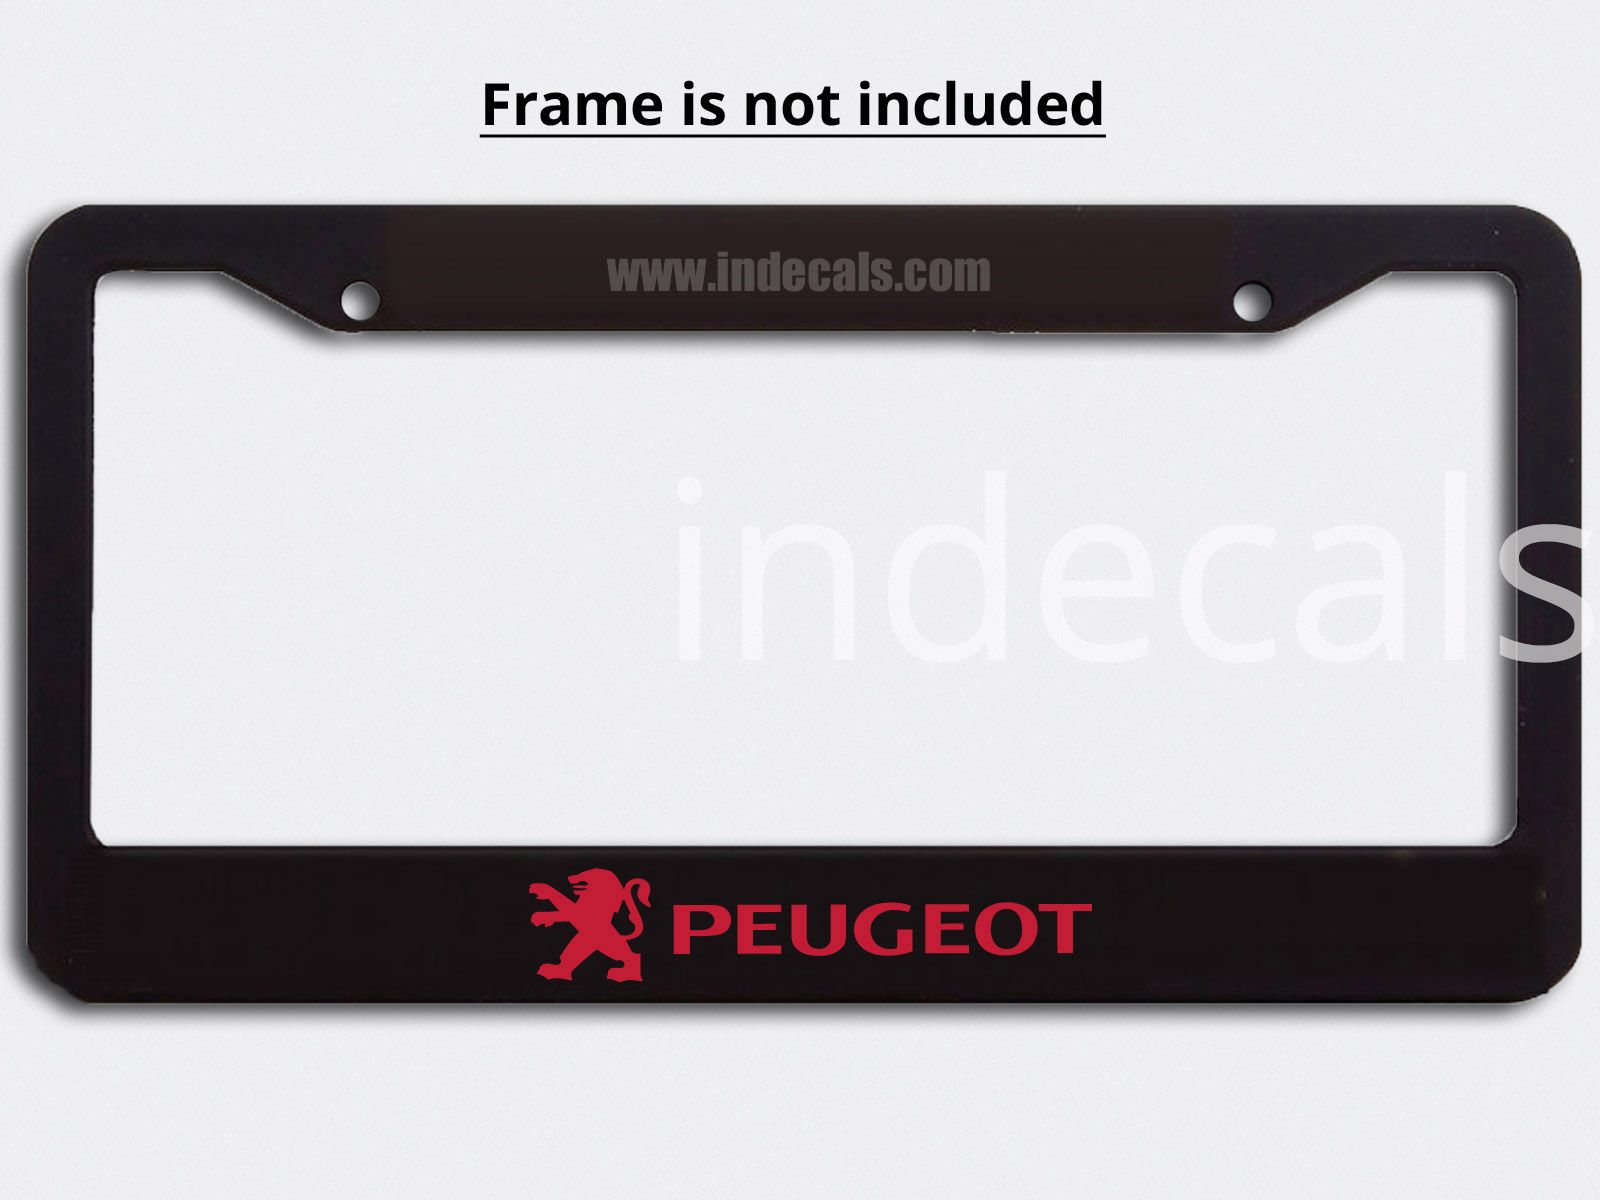 3 x Peugeot Stickers for Plate Frame - Red